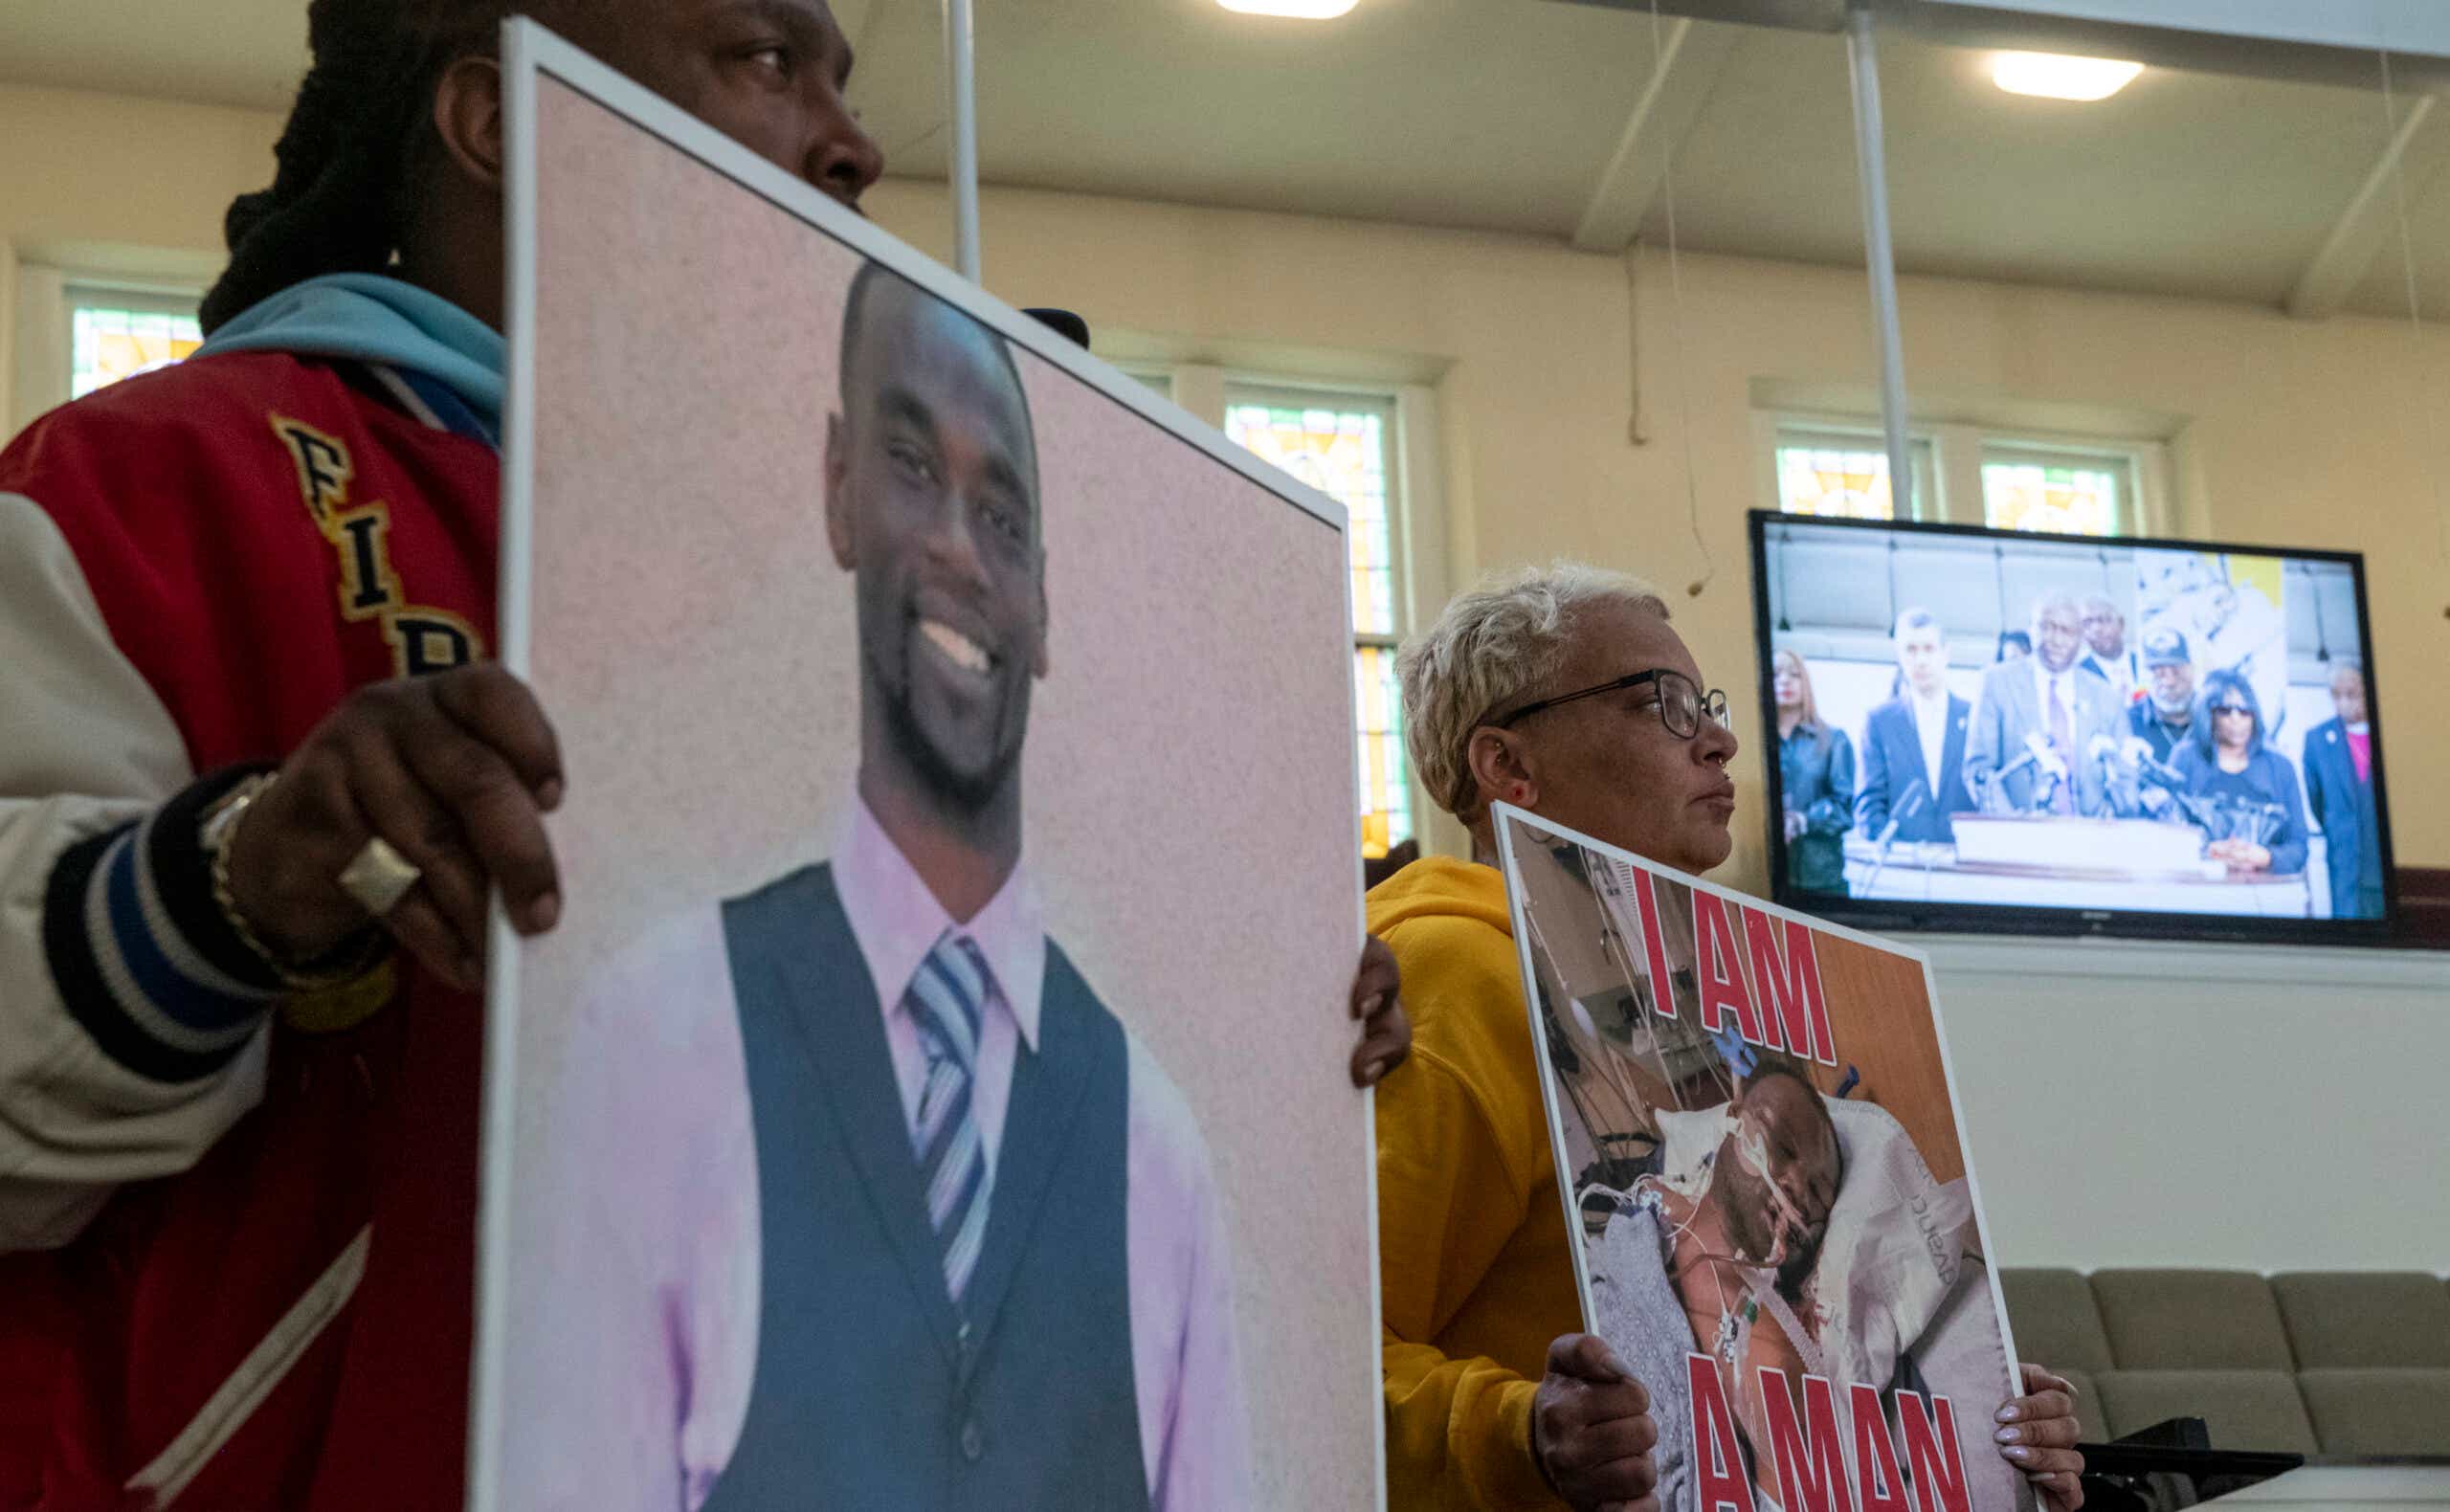 Activists hold signs showing Tyre Nichols